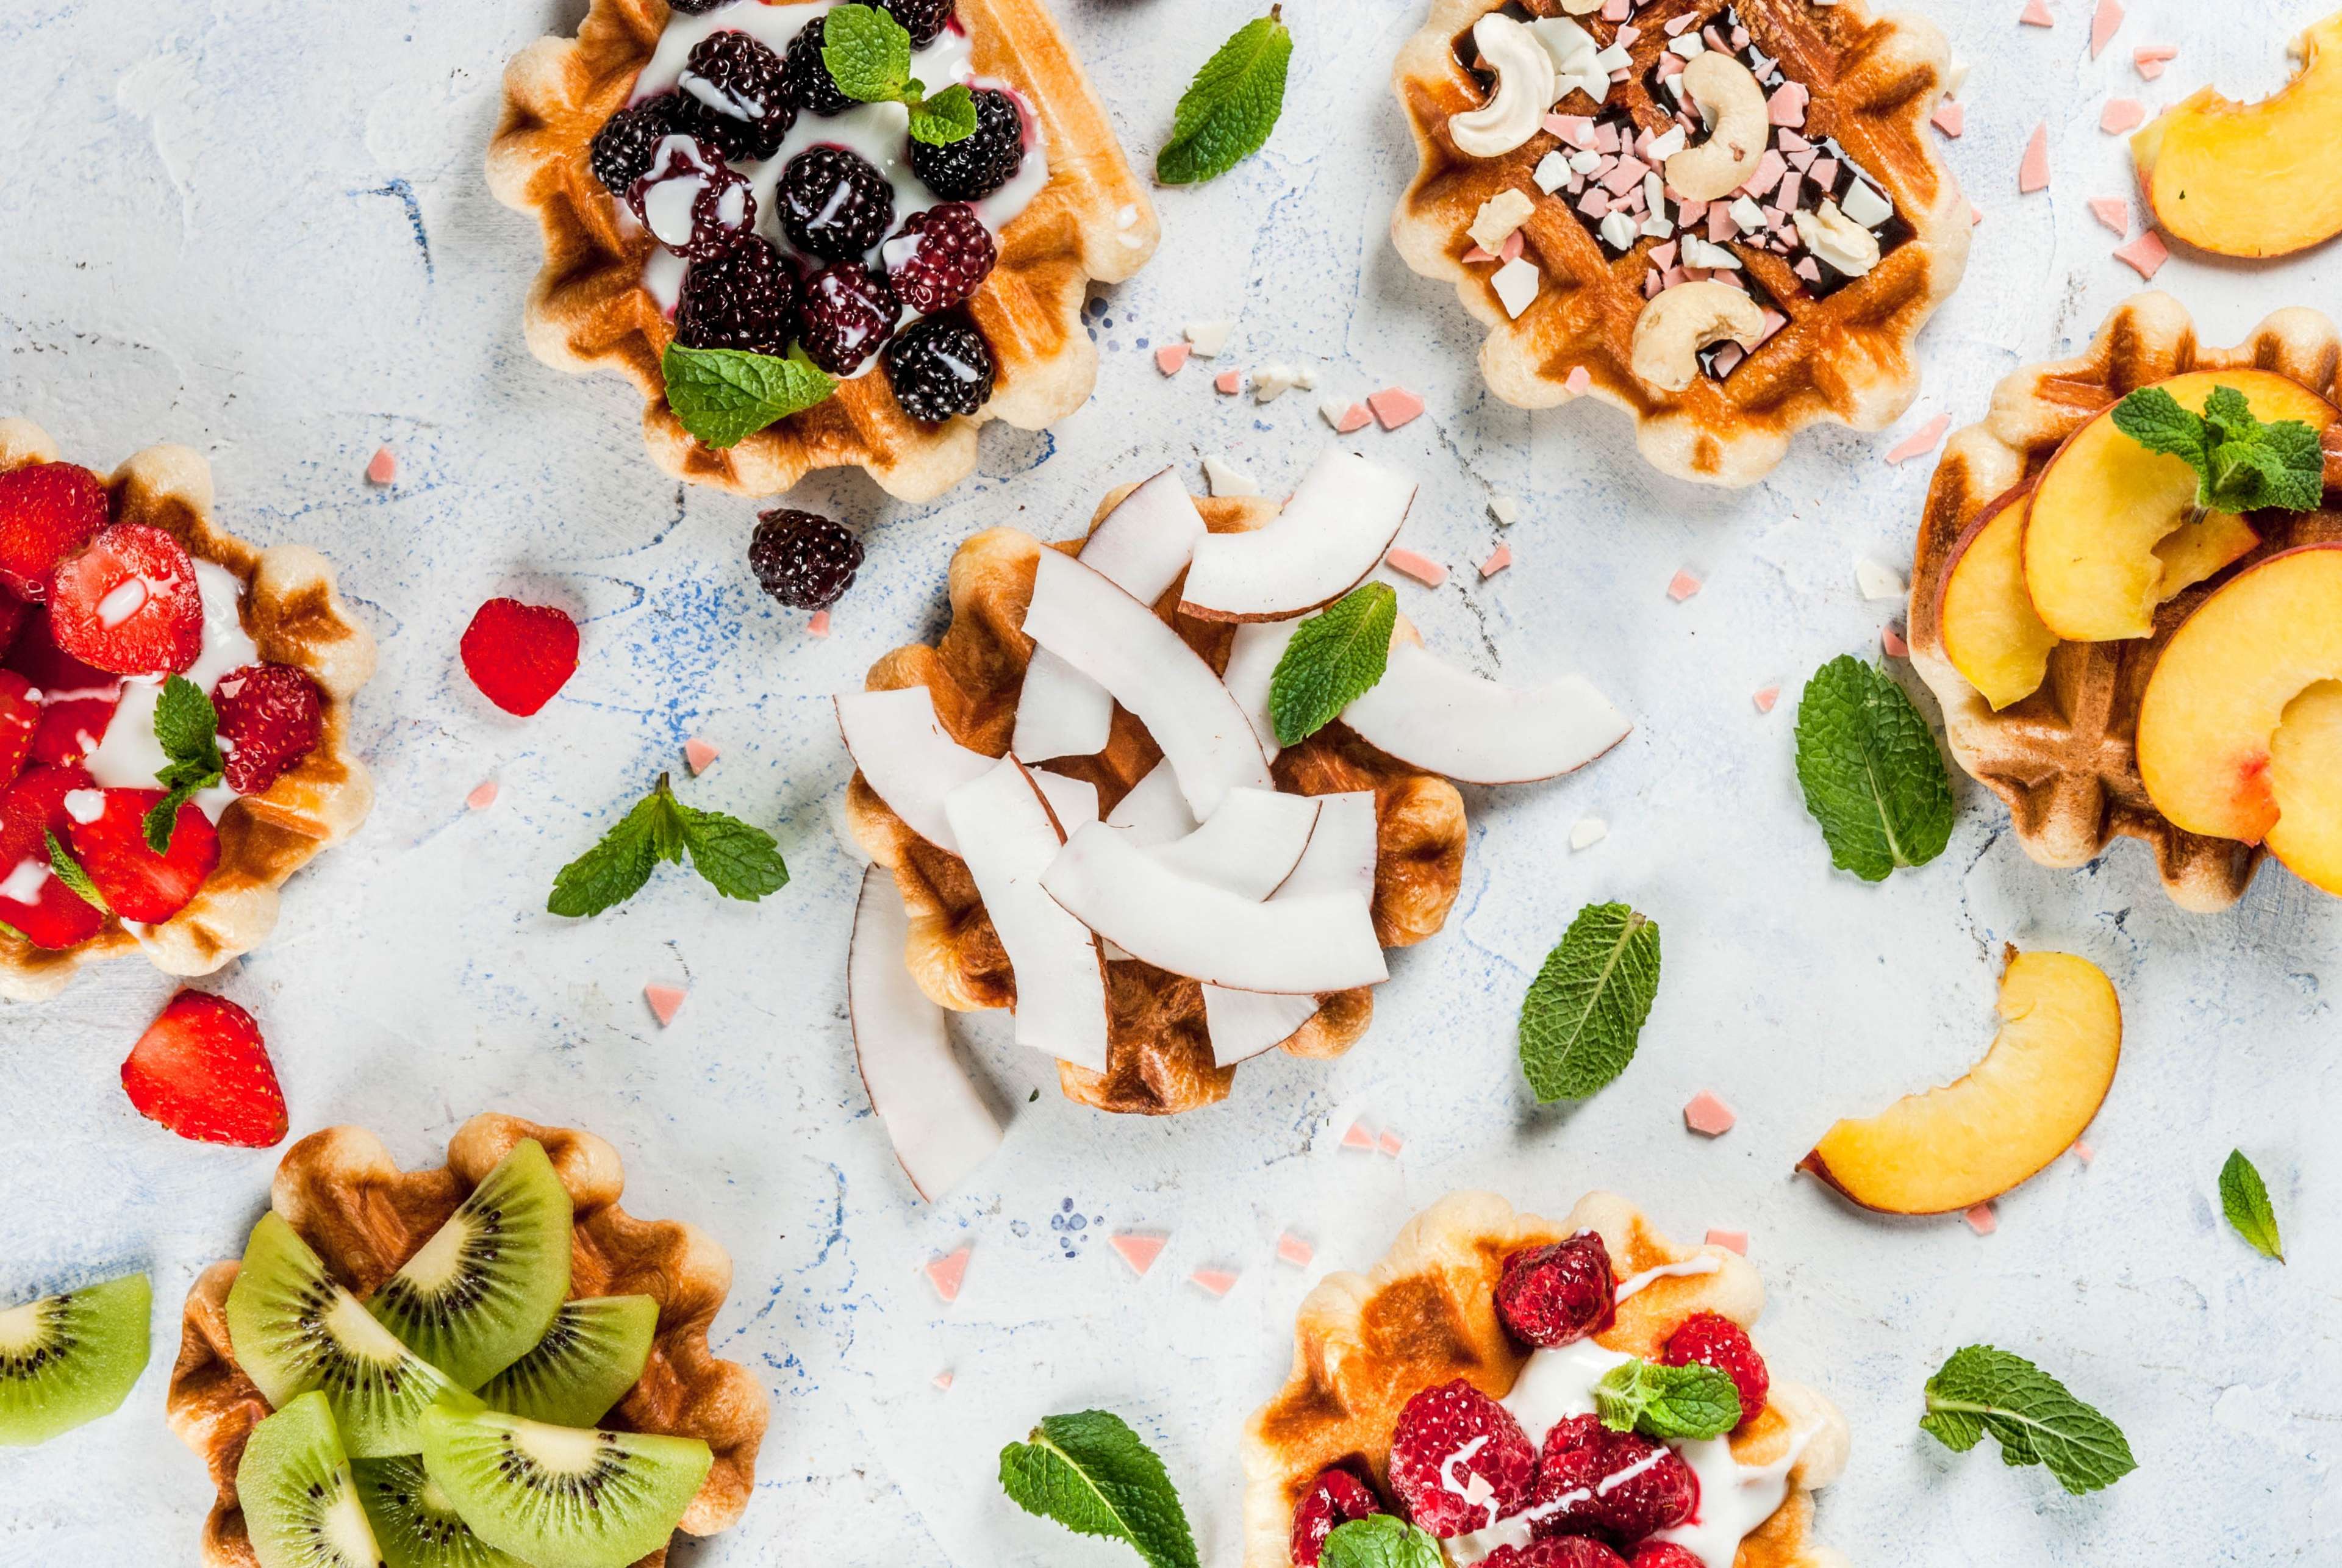 61a7e188ded7e978c662dcef_waffles%20with%20different%20toppings.jpeg